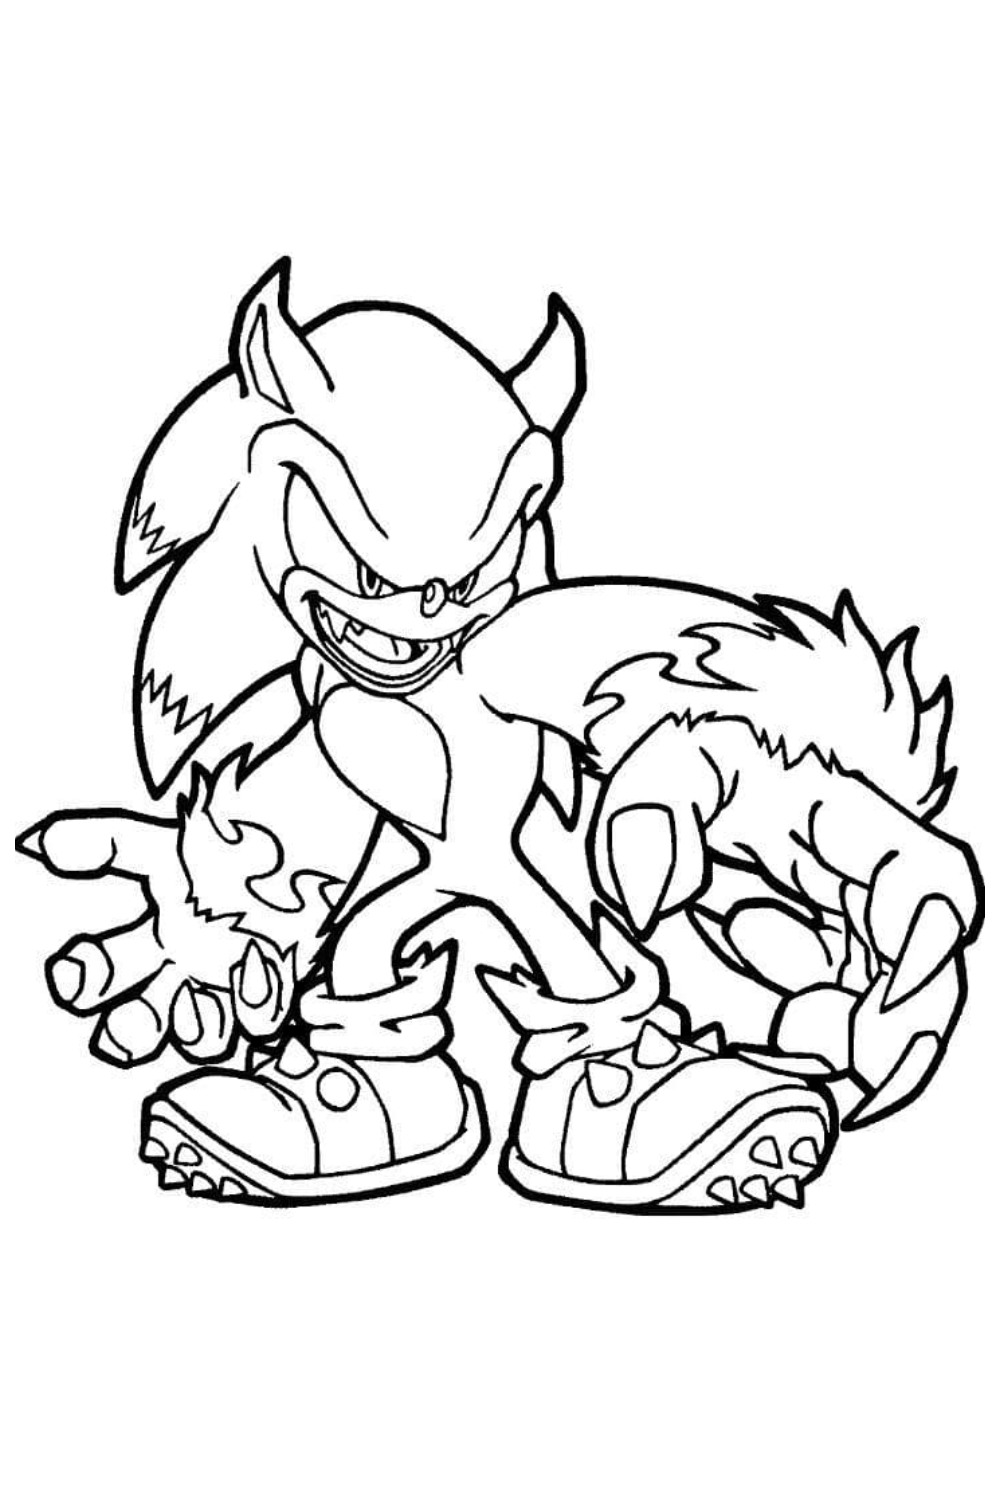 sonic the hedgehog coloring pages tails